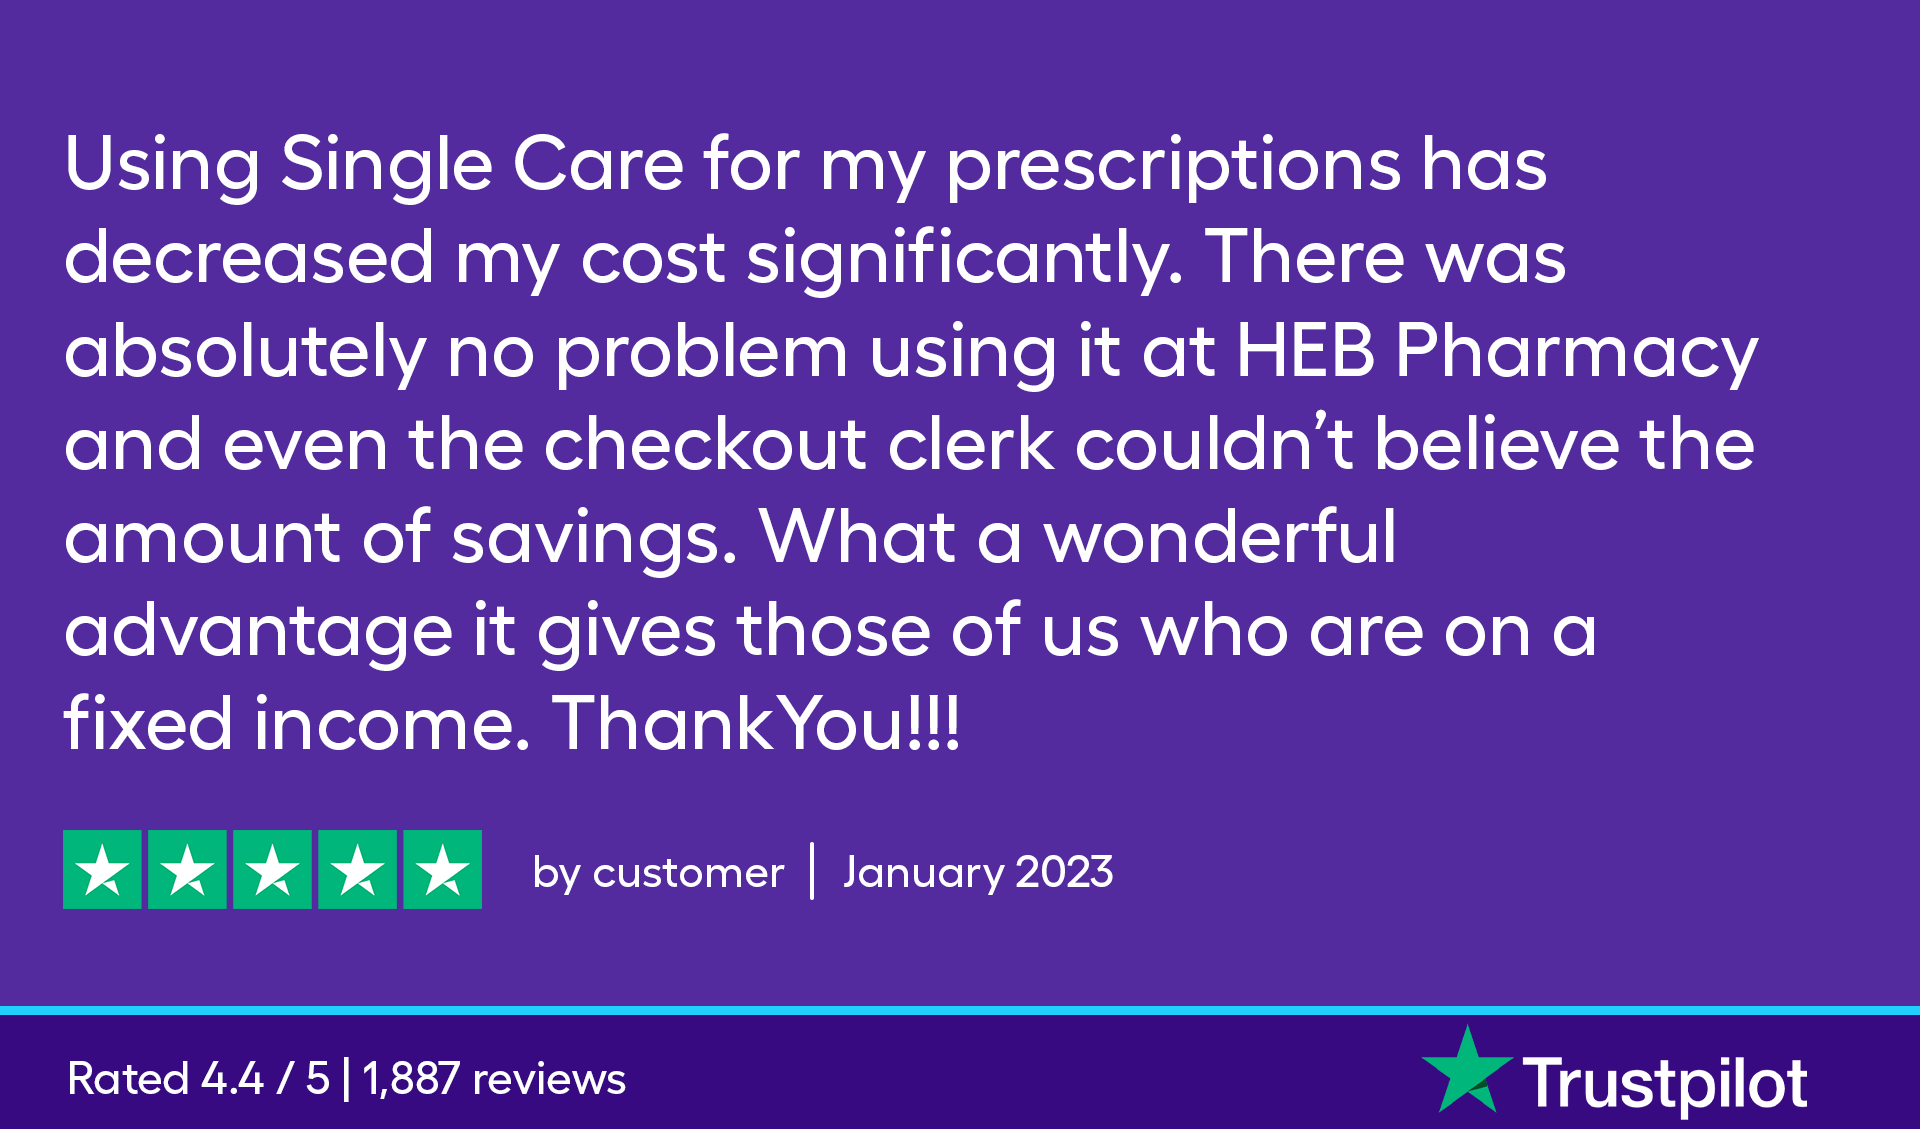 Using SingleCare for my prescriptions has decreased my cost significantly. There was absolutely no problem using it at HEB Pharmacy and even the checkout clerk couldn't believe the amount of savings. What a wonderful advantage it gives those of us on a fixed income. Thank you!!!